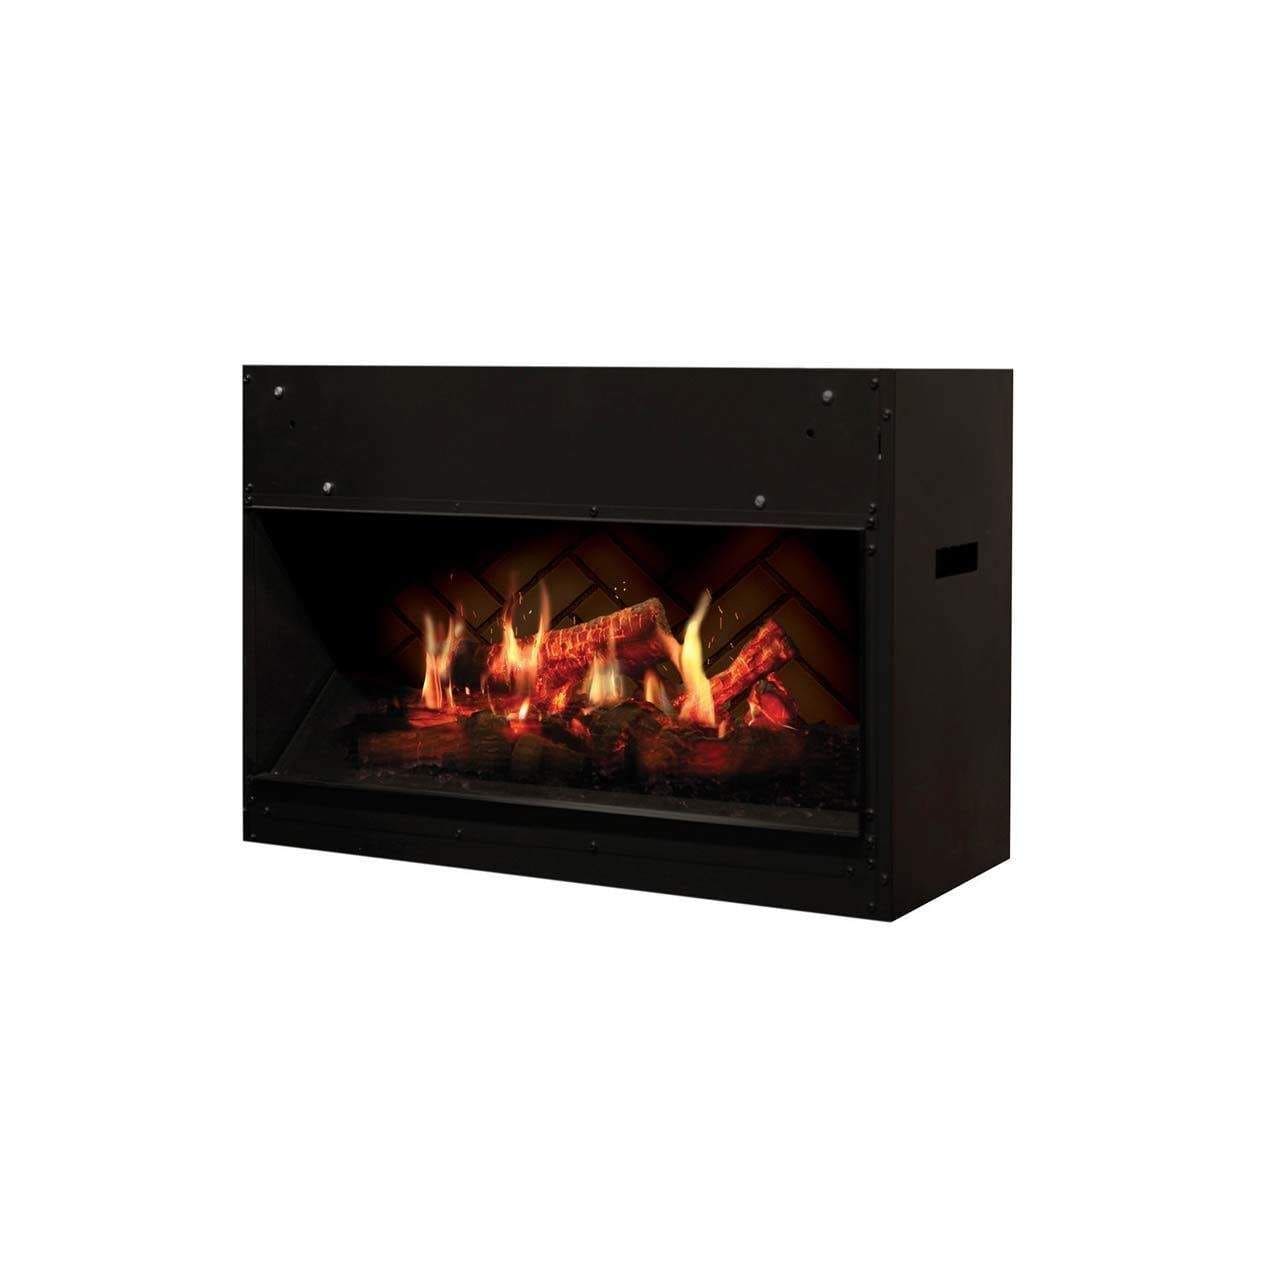 Dimplex Linear Electric Fireplaces Dimplex -  Opti-V Solo/Duet Built-In Electric Fireplace | 30" & 54" | VF